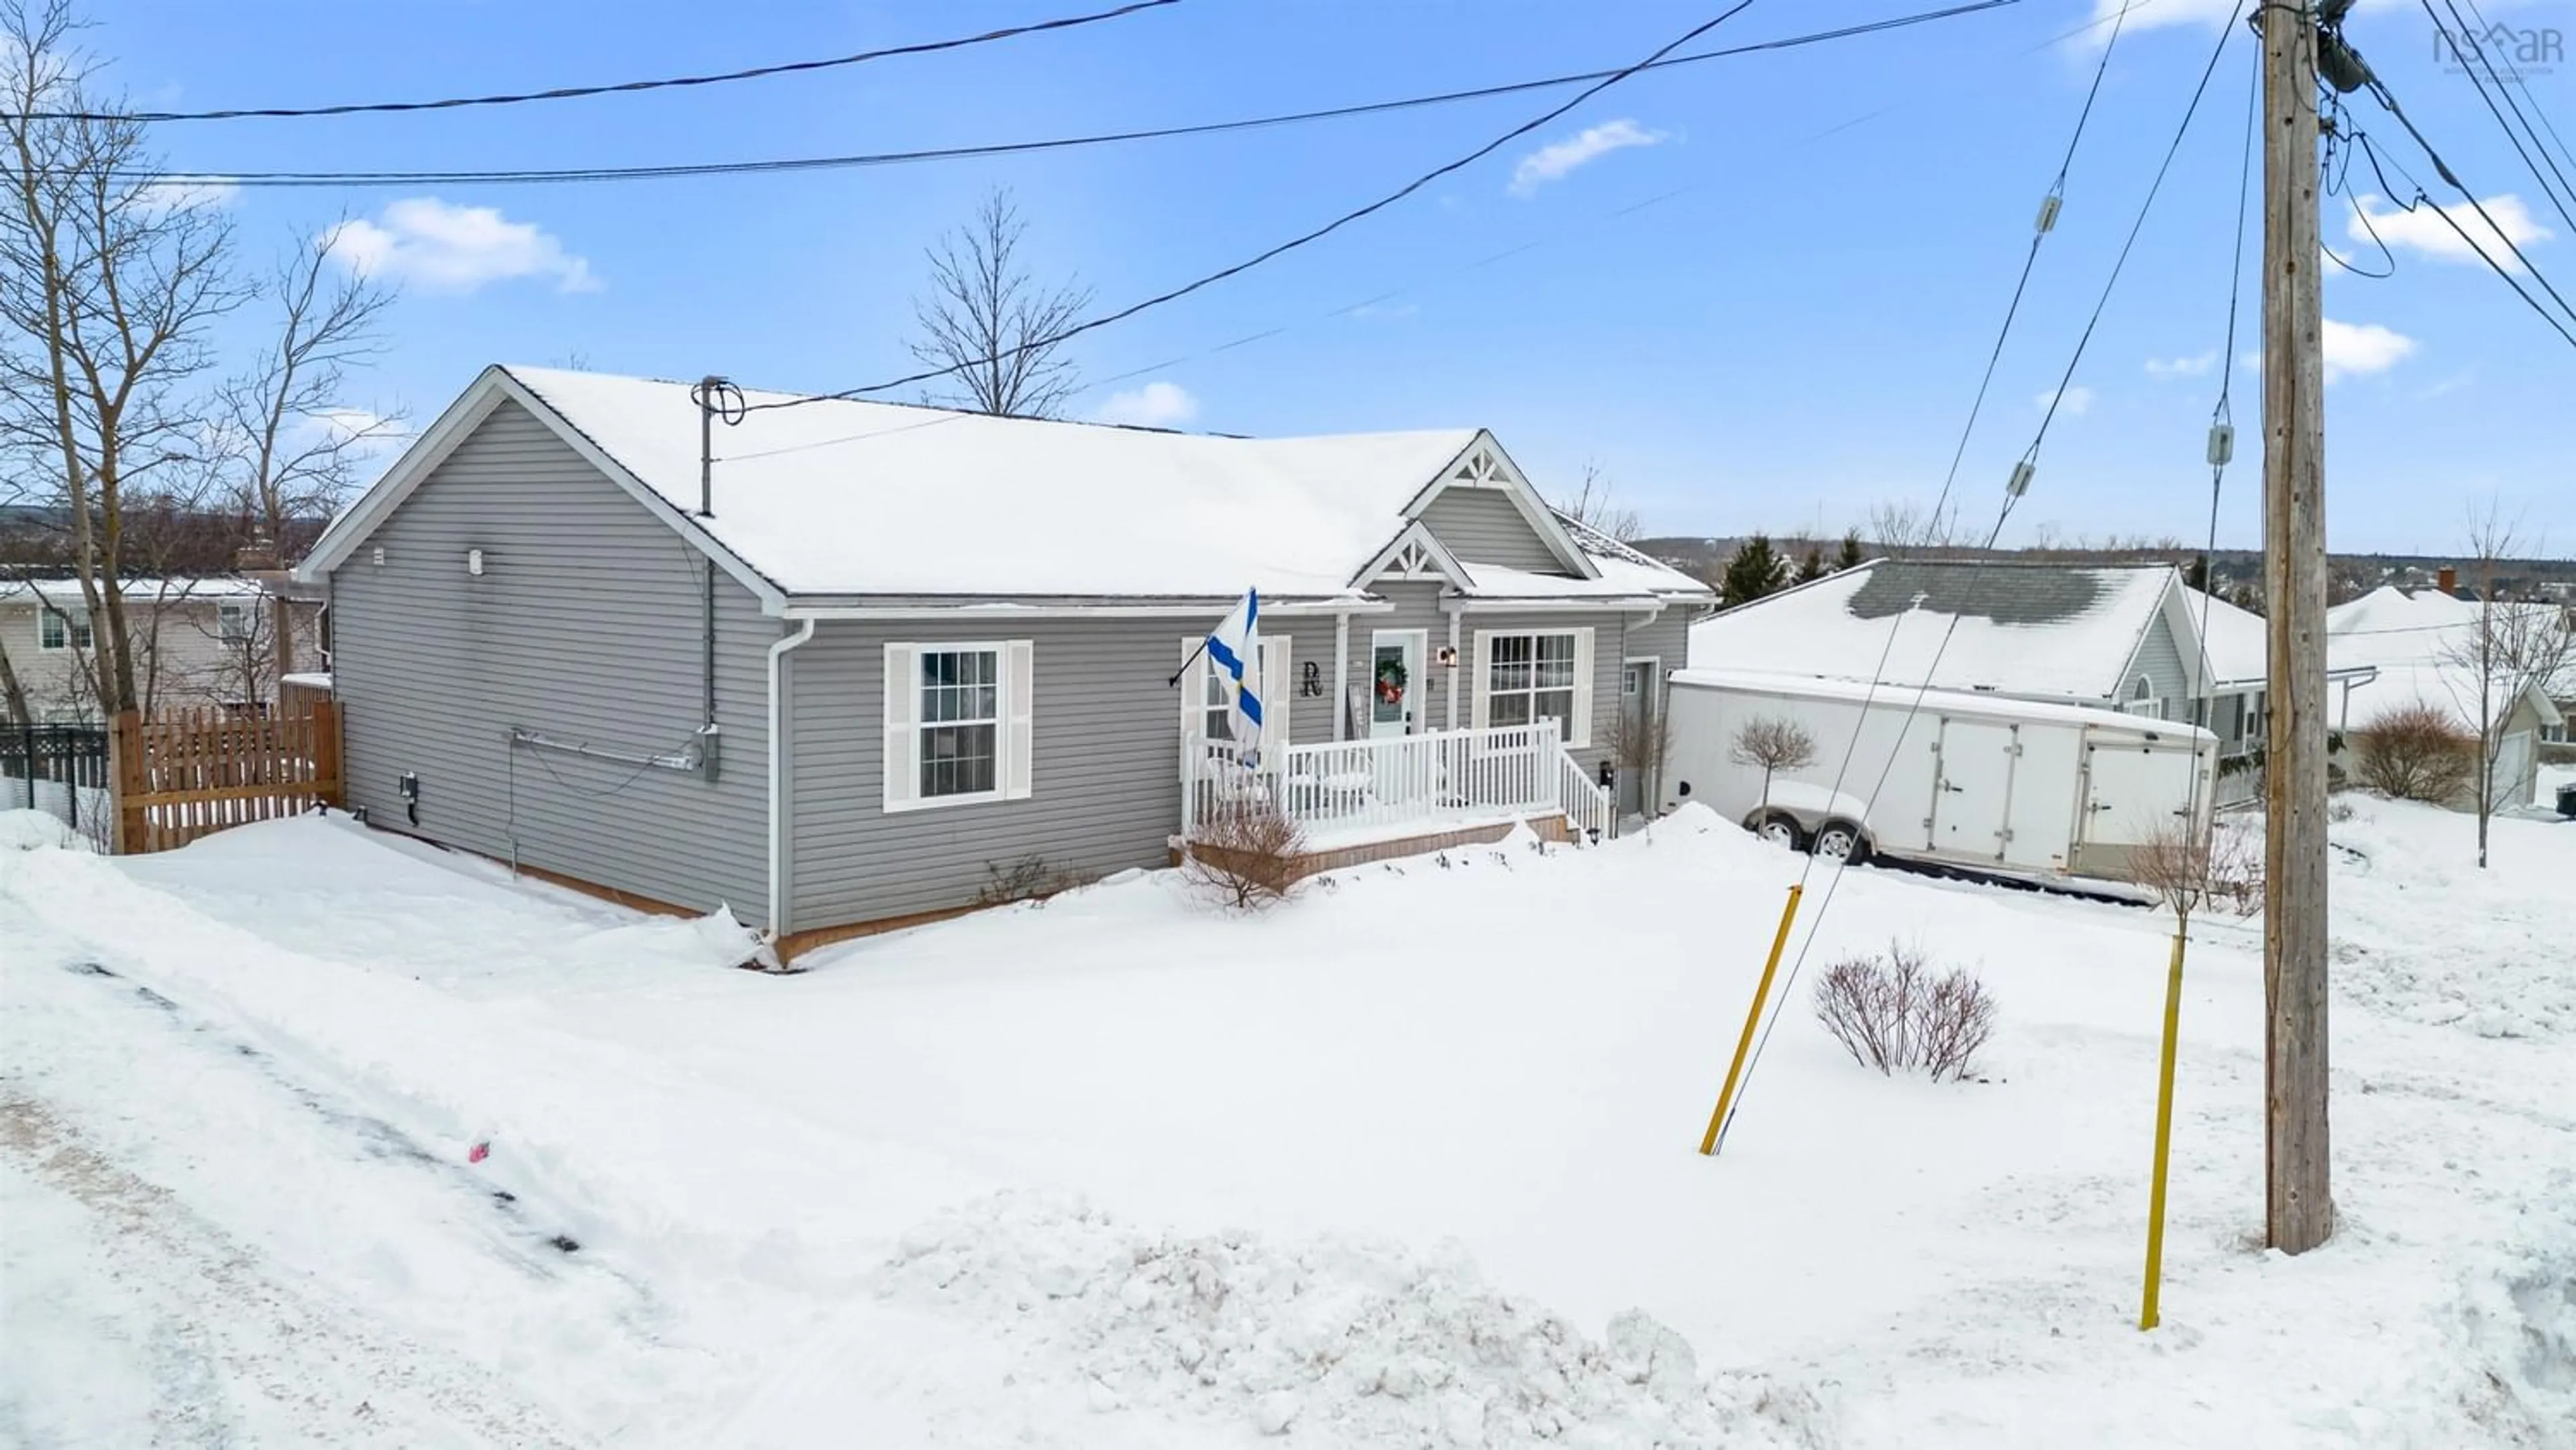 Home with unknown exterior material for 71 Birchview Cres, New Glasgow Nova Scotia B2H 5T6